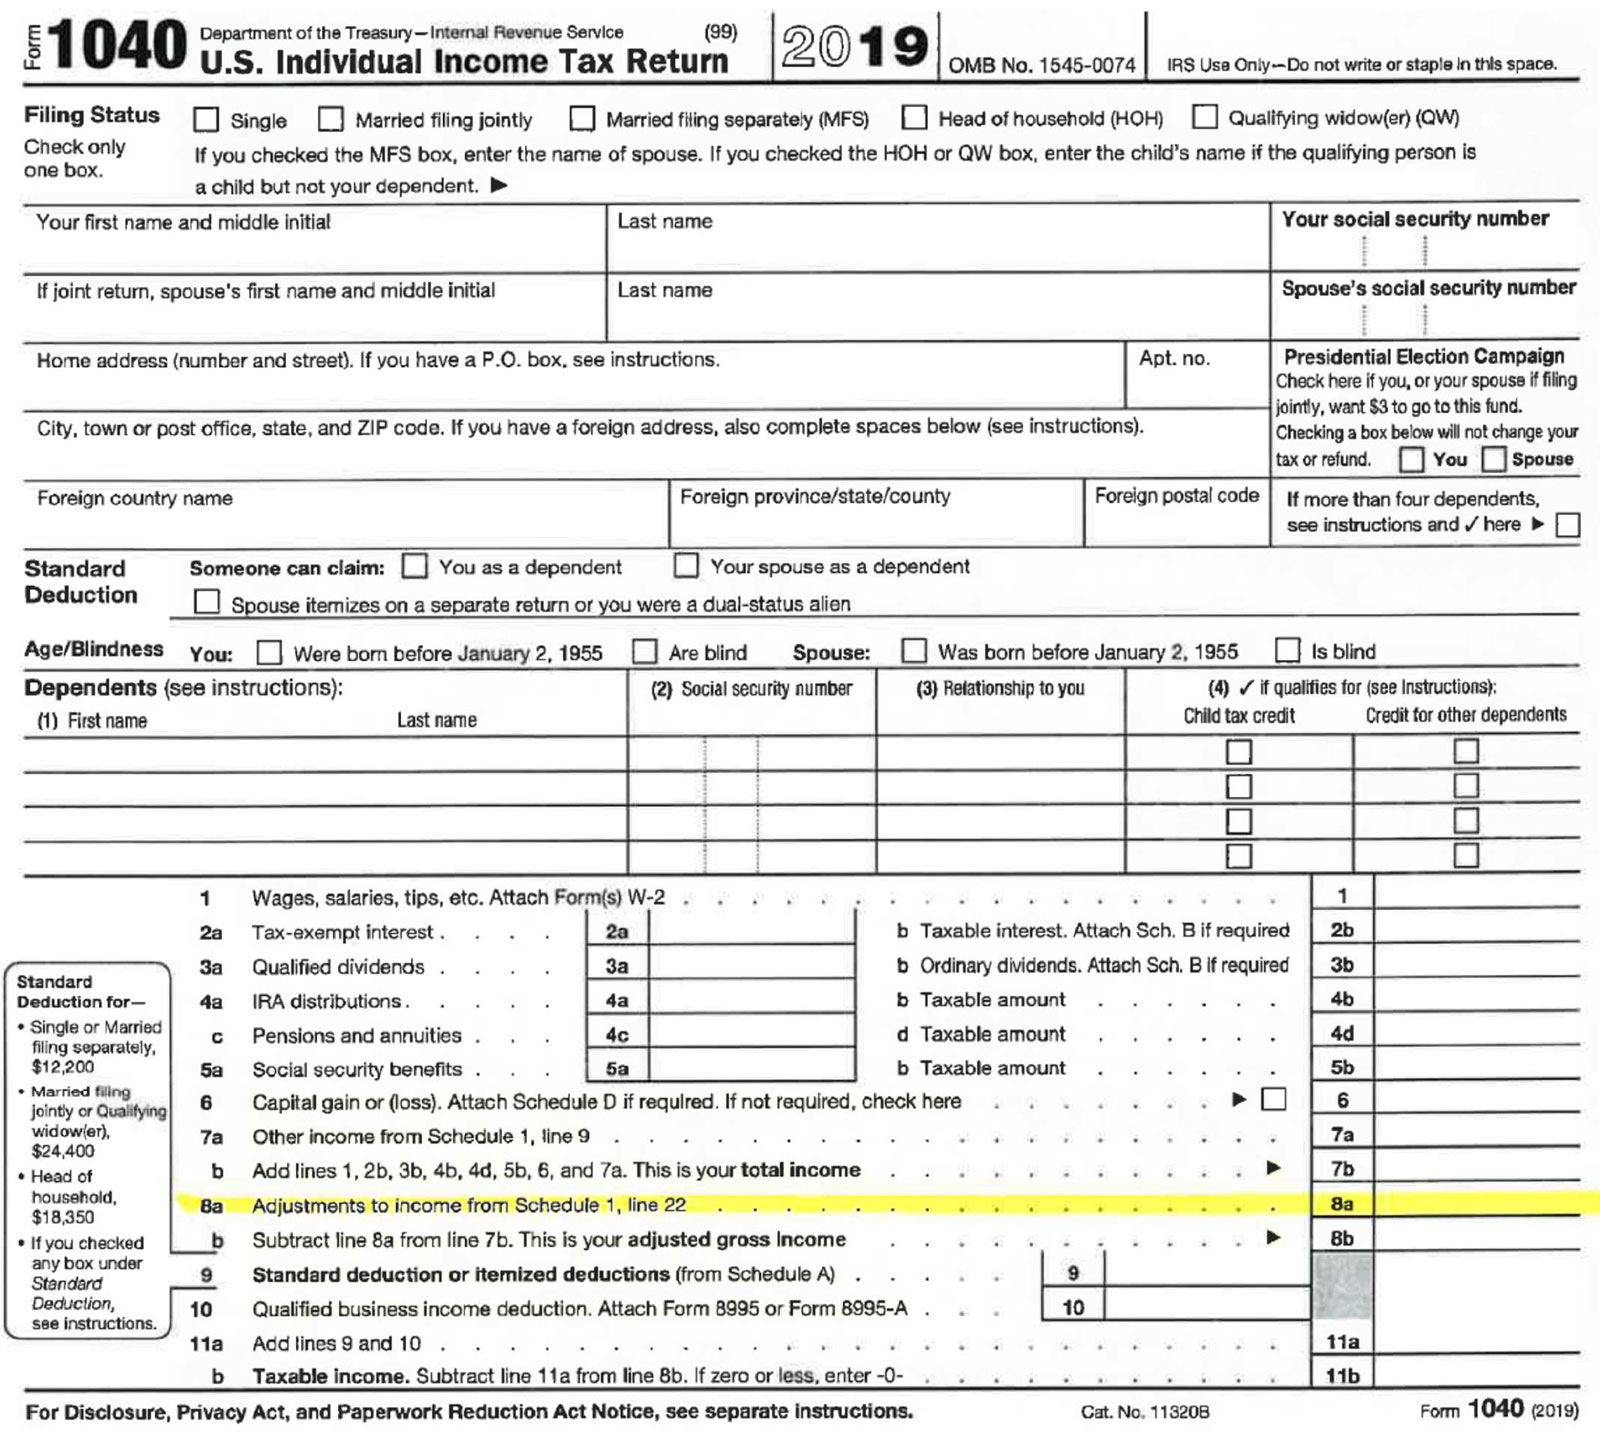 Irs Schedule 1 2022 Instructions Do You Need To Submit A Schedule 1, 2, And 3 Along With Your 1040 Tax  Return? | Student Financial Aid